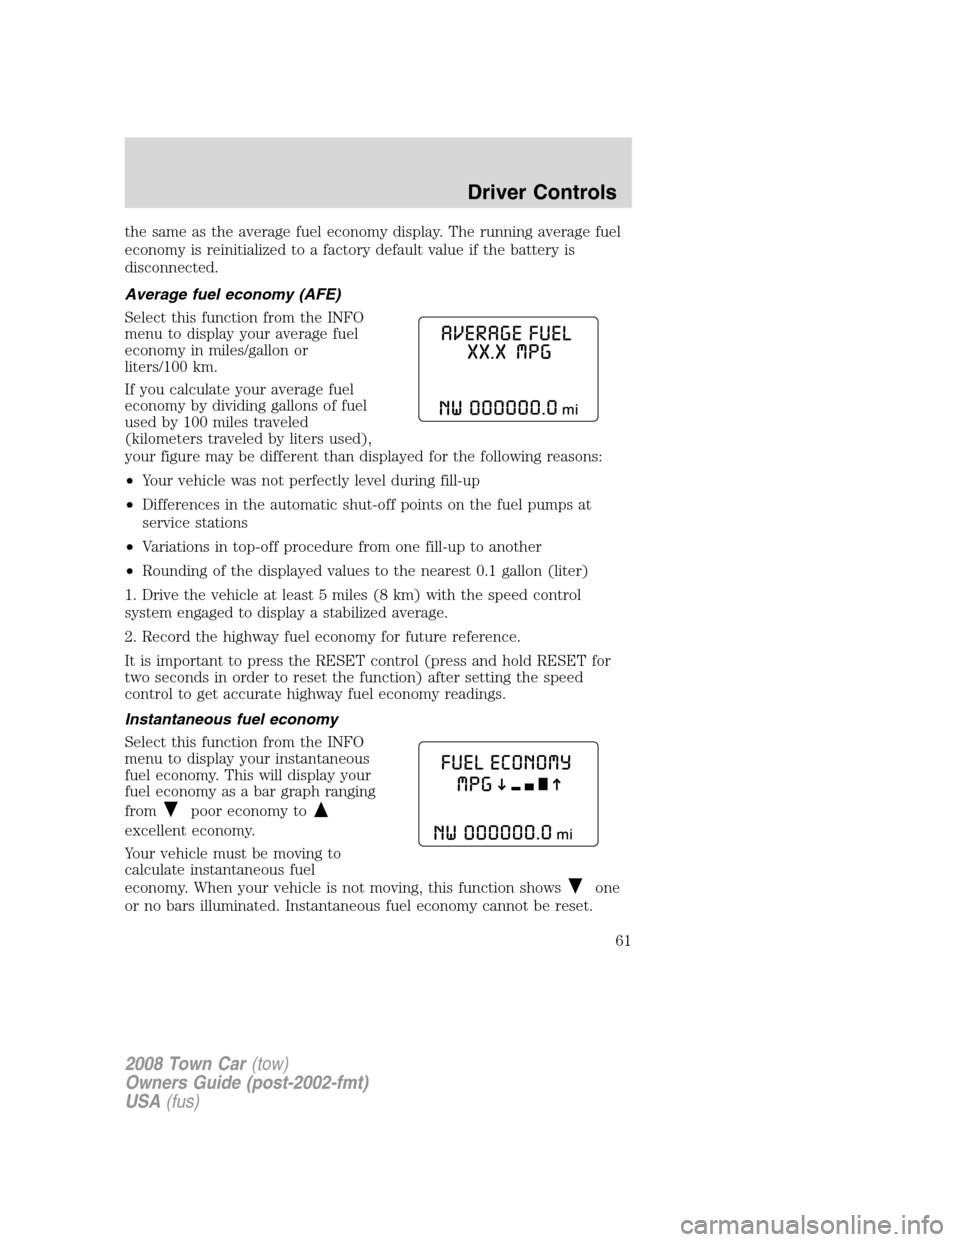 LINCOLN TOWN CAR 2008 Repair Manual the same as the average fuel economy display. The running average fuel
economy is reinitialized to a factory default value if the battery is
disconnected.
Average fuel economy (AFE)
Select this functi